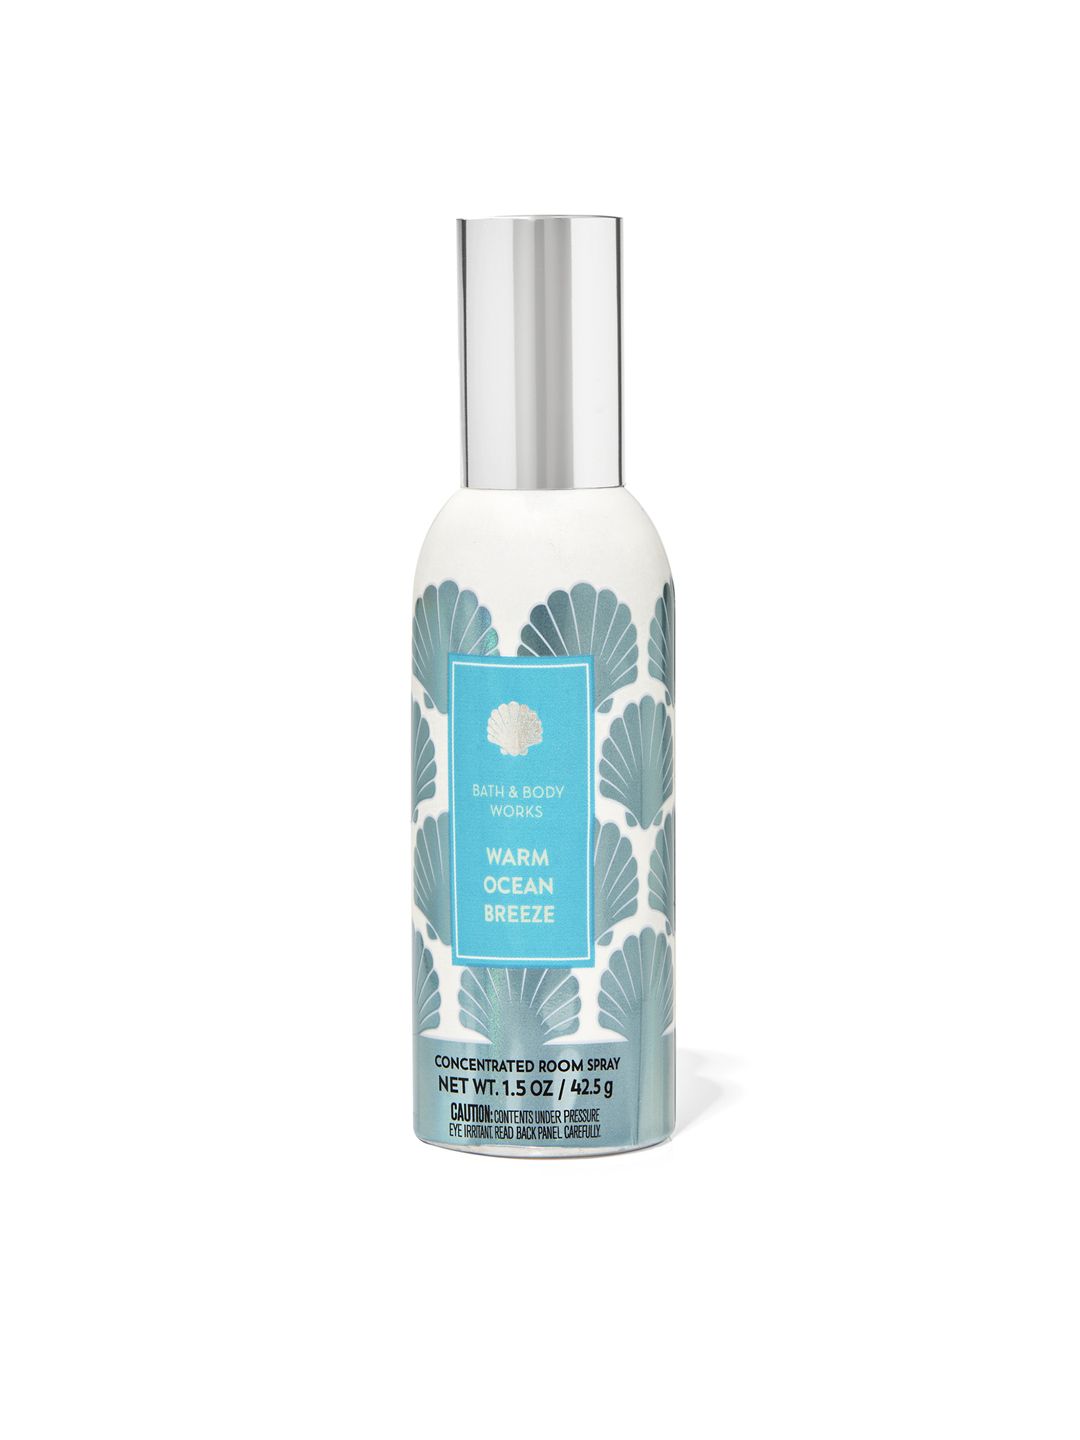 Bath & Body Works Warm Ocean Breeze Concentrated Room Spray - 42.5 g Price in India